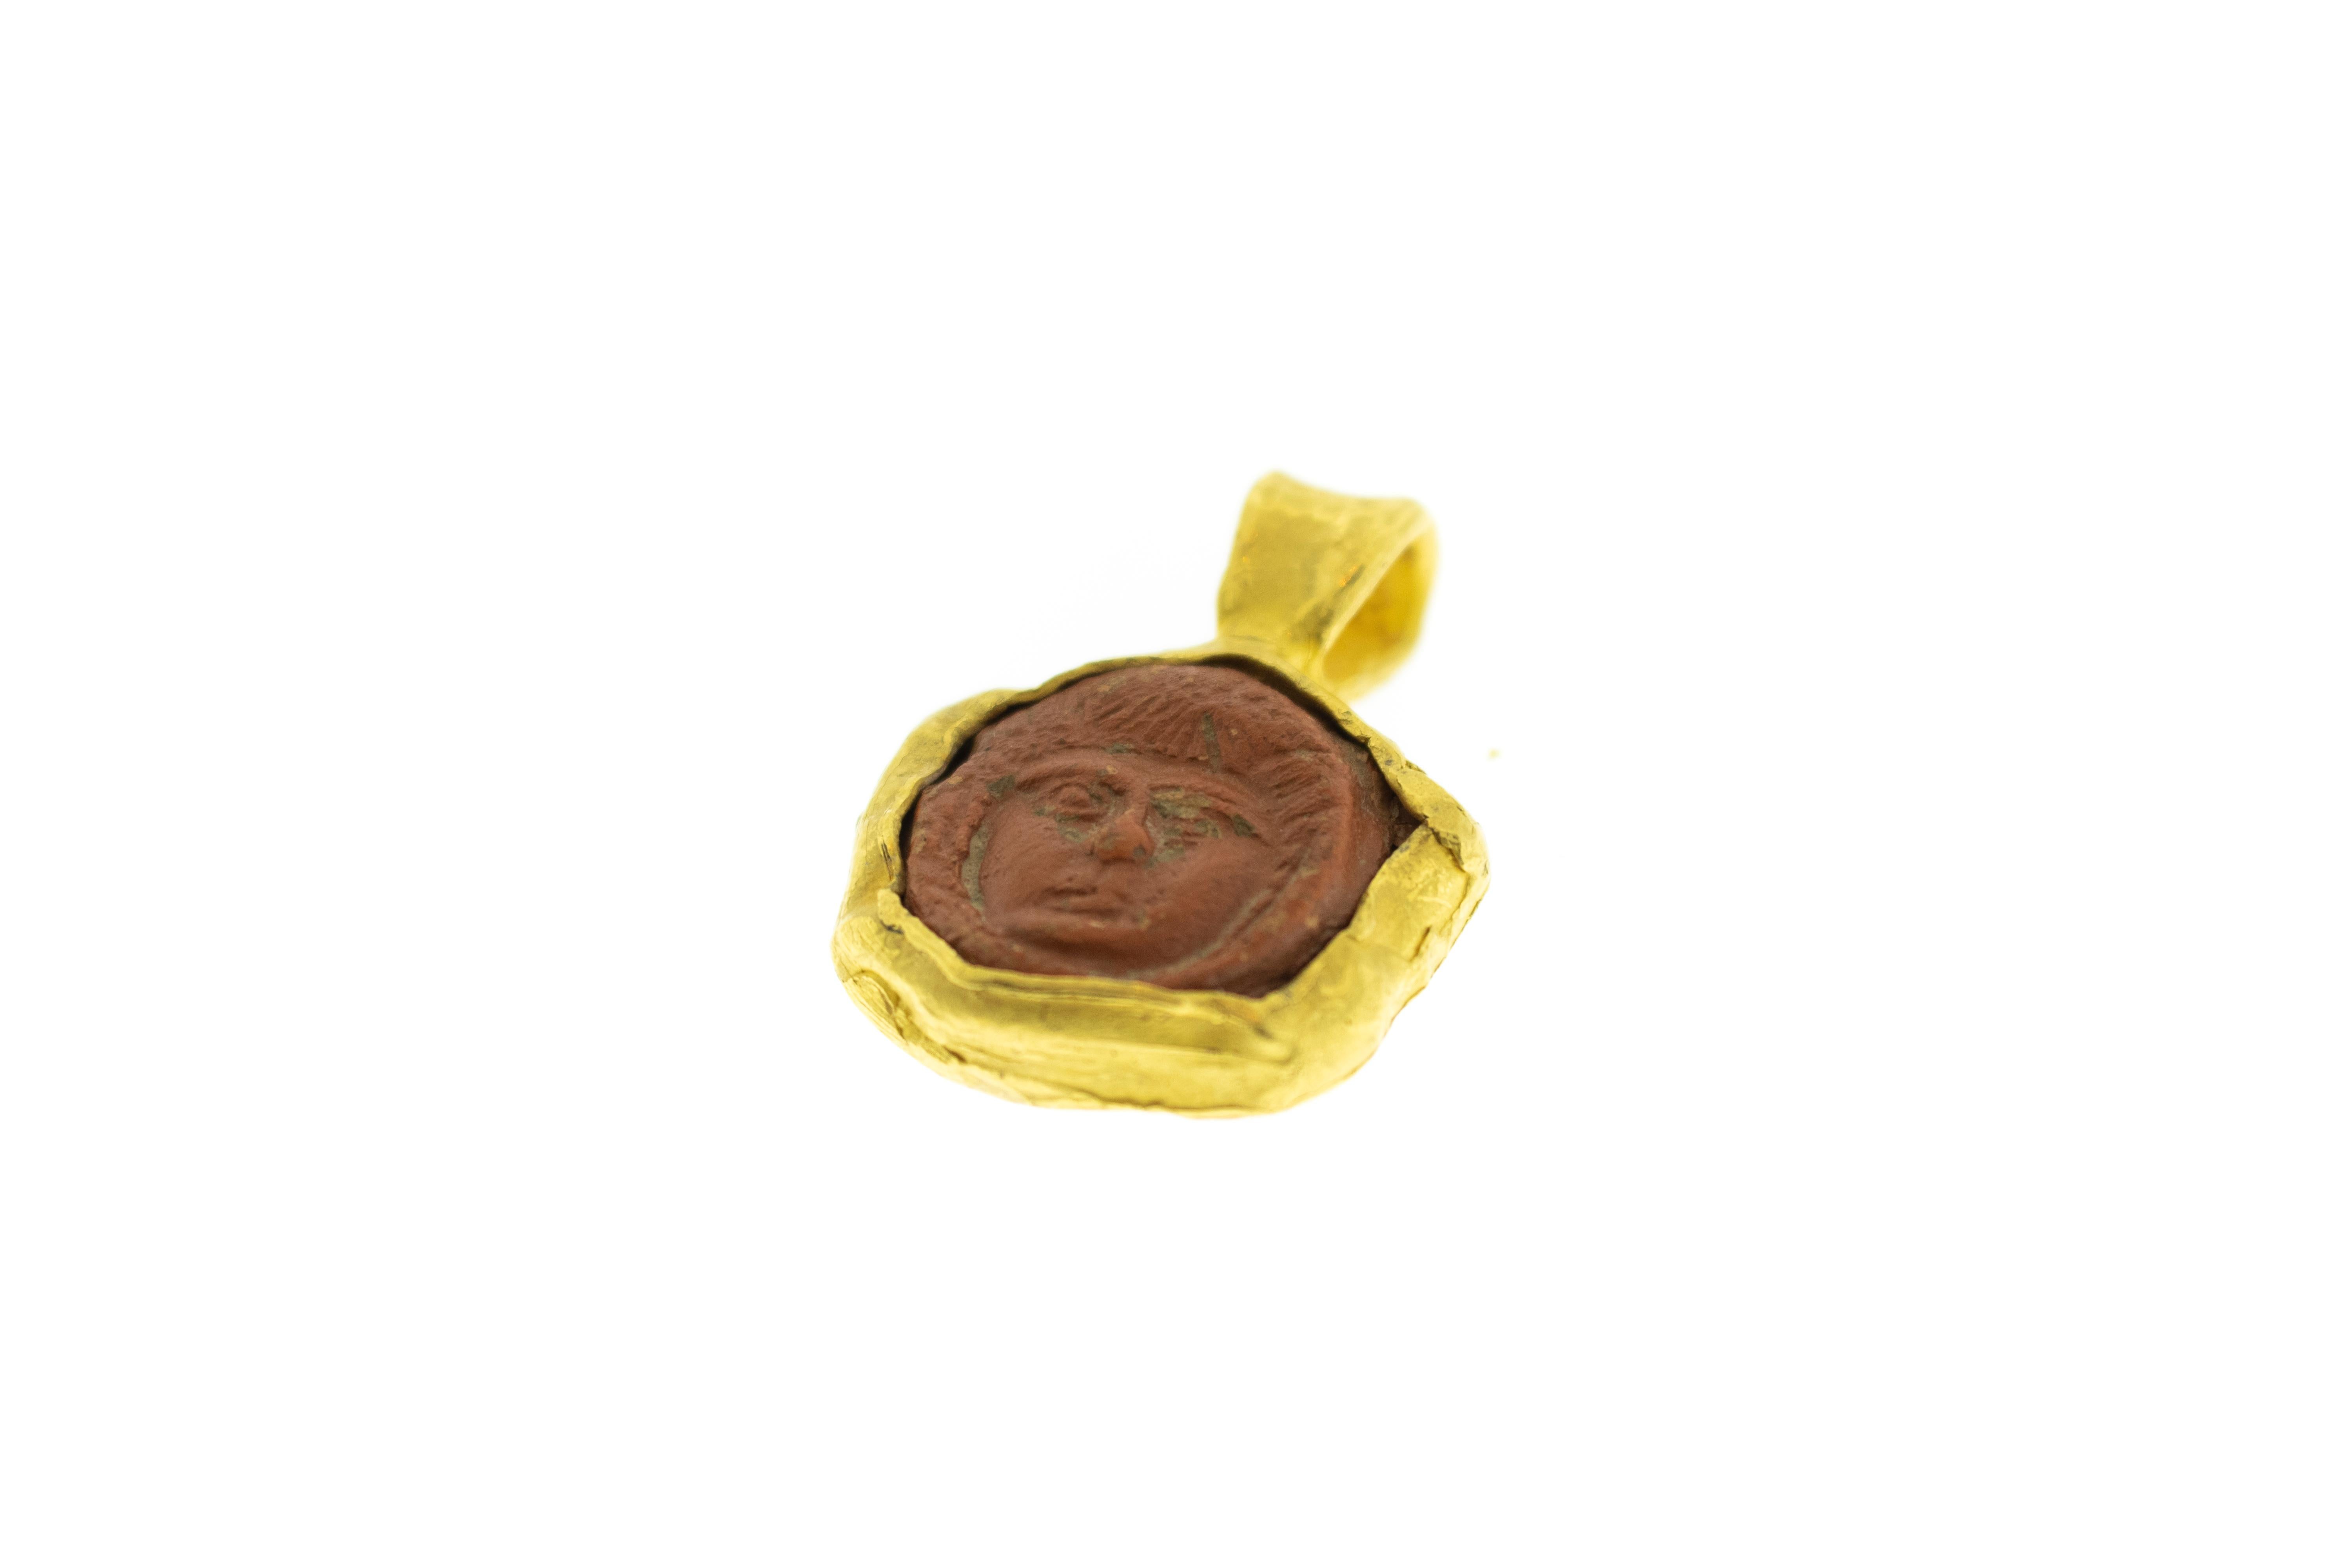 Ancient Clay Artifact Mounted in 22k Gold Pendant. Total weight 26.55 grams. Height 1.5 inches Width 1 inch